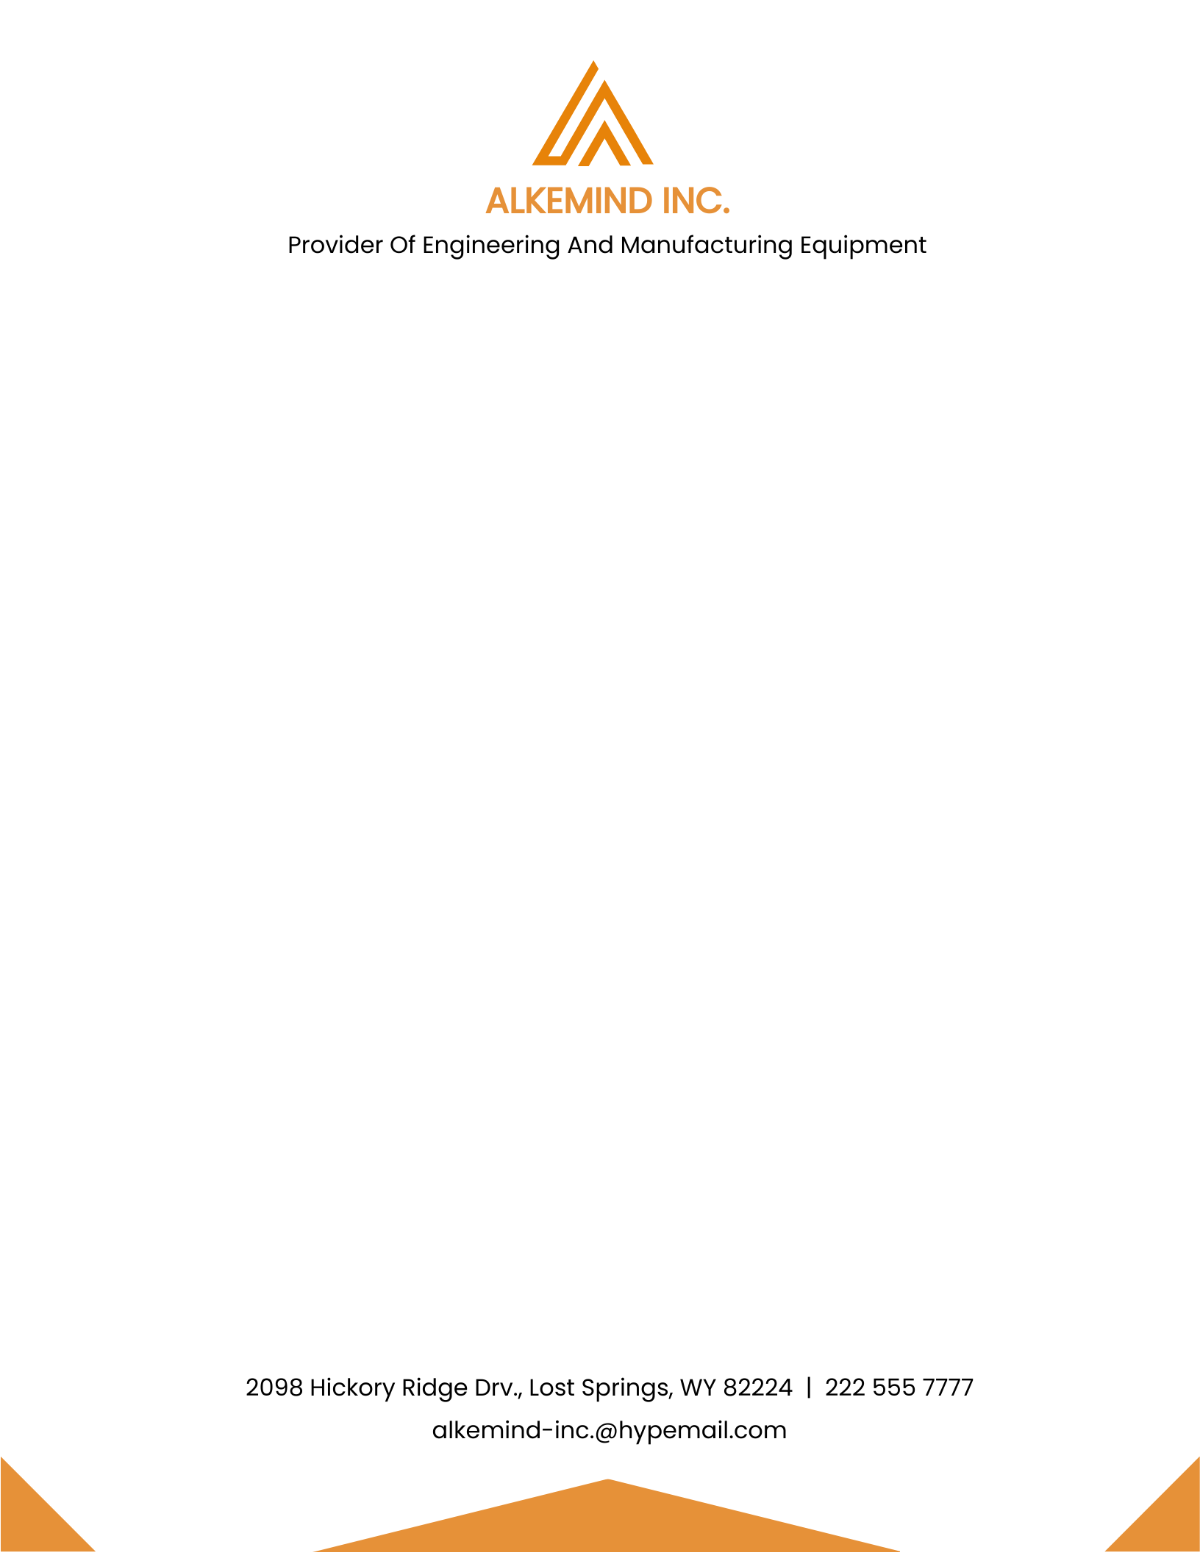 Manufacturing Engineering Letterhead Template